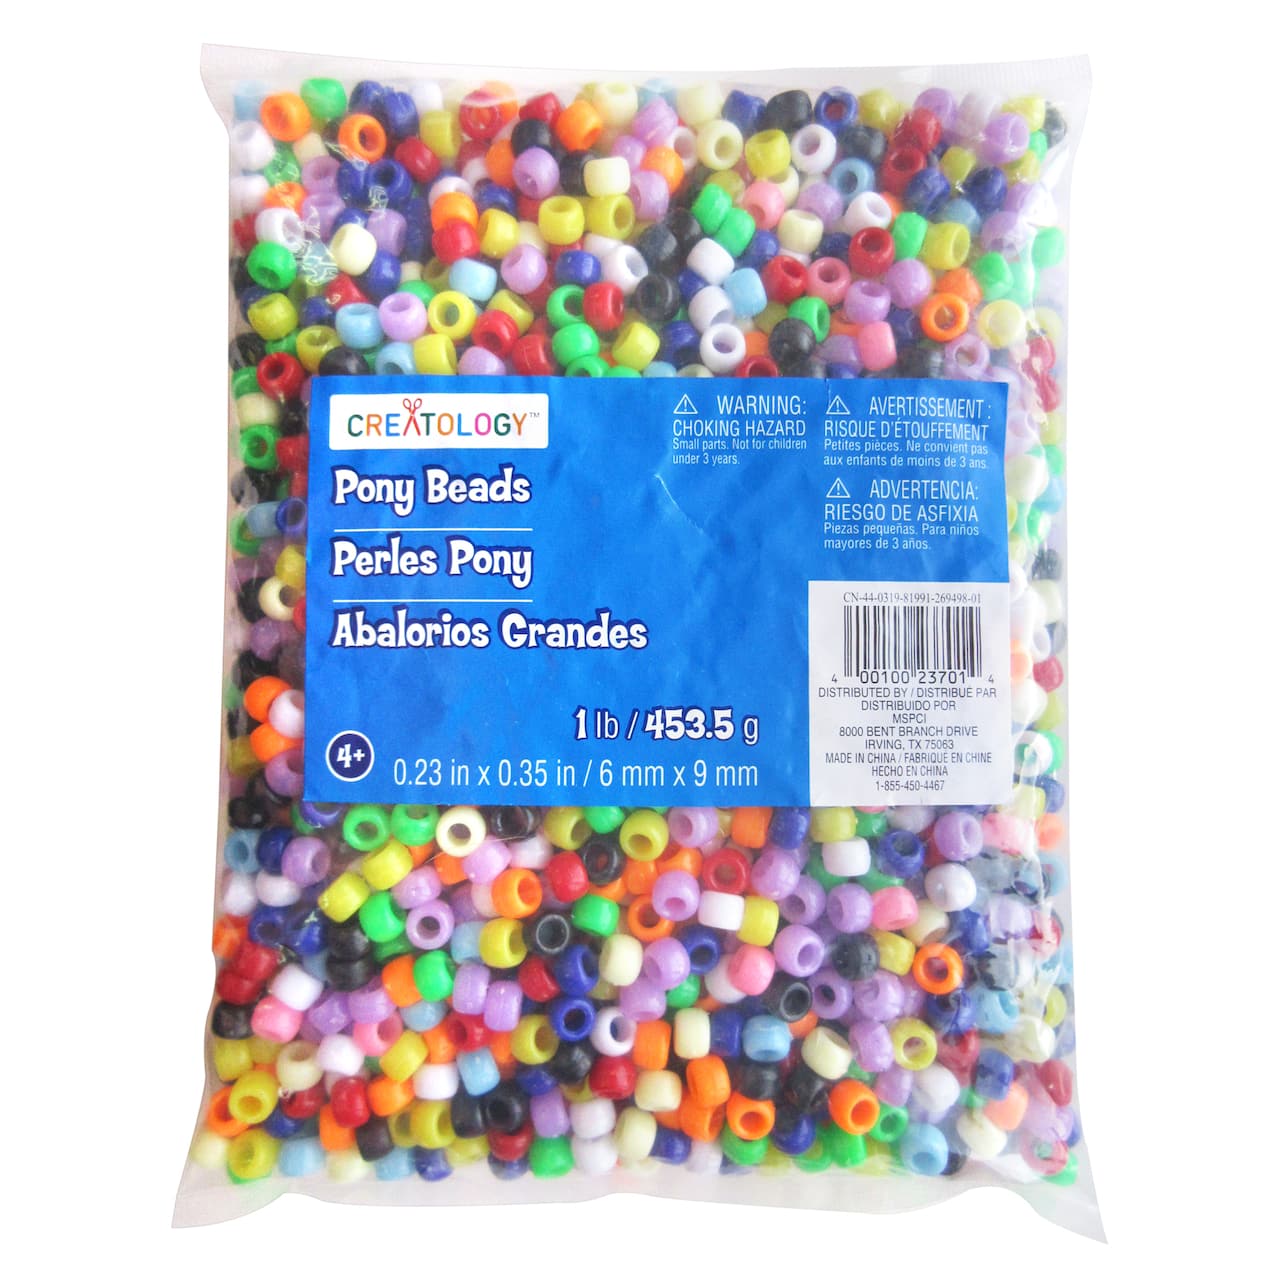 POP! Possibilities 9mm Heart Pony Beads in Value Pack by POP